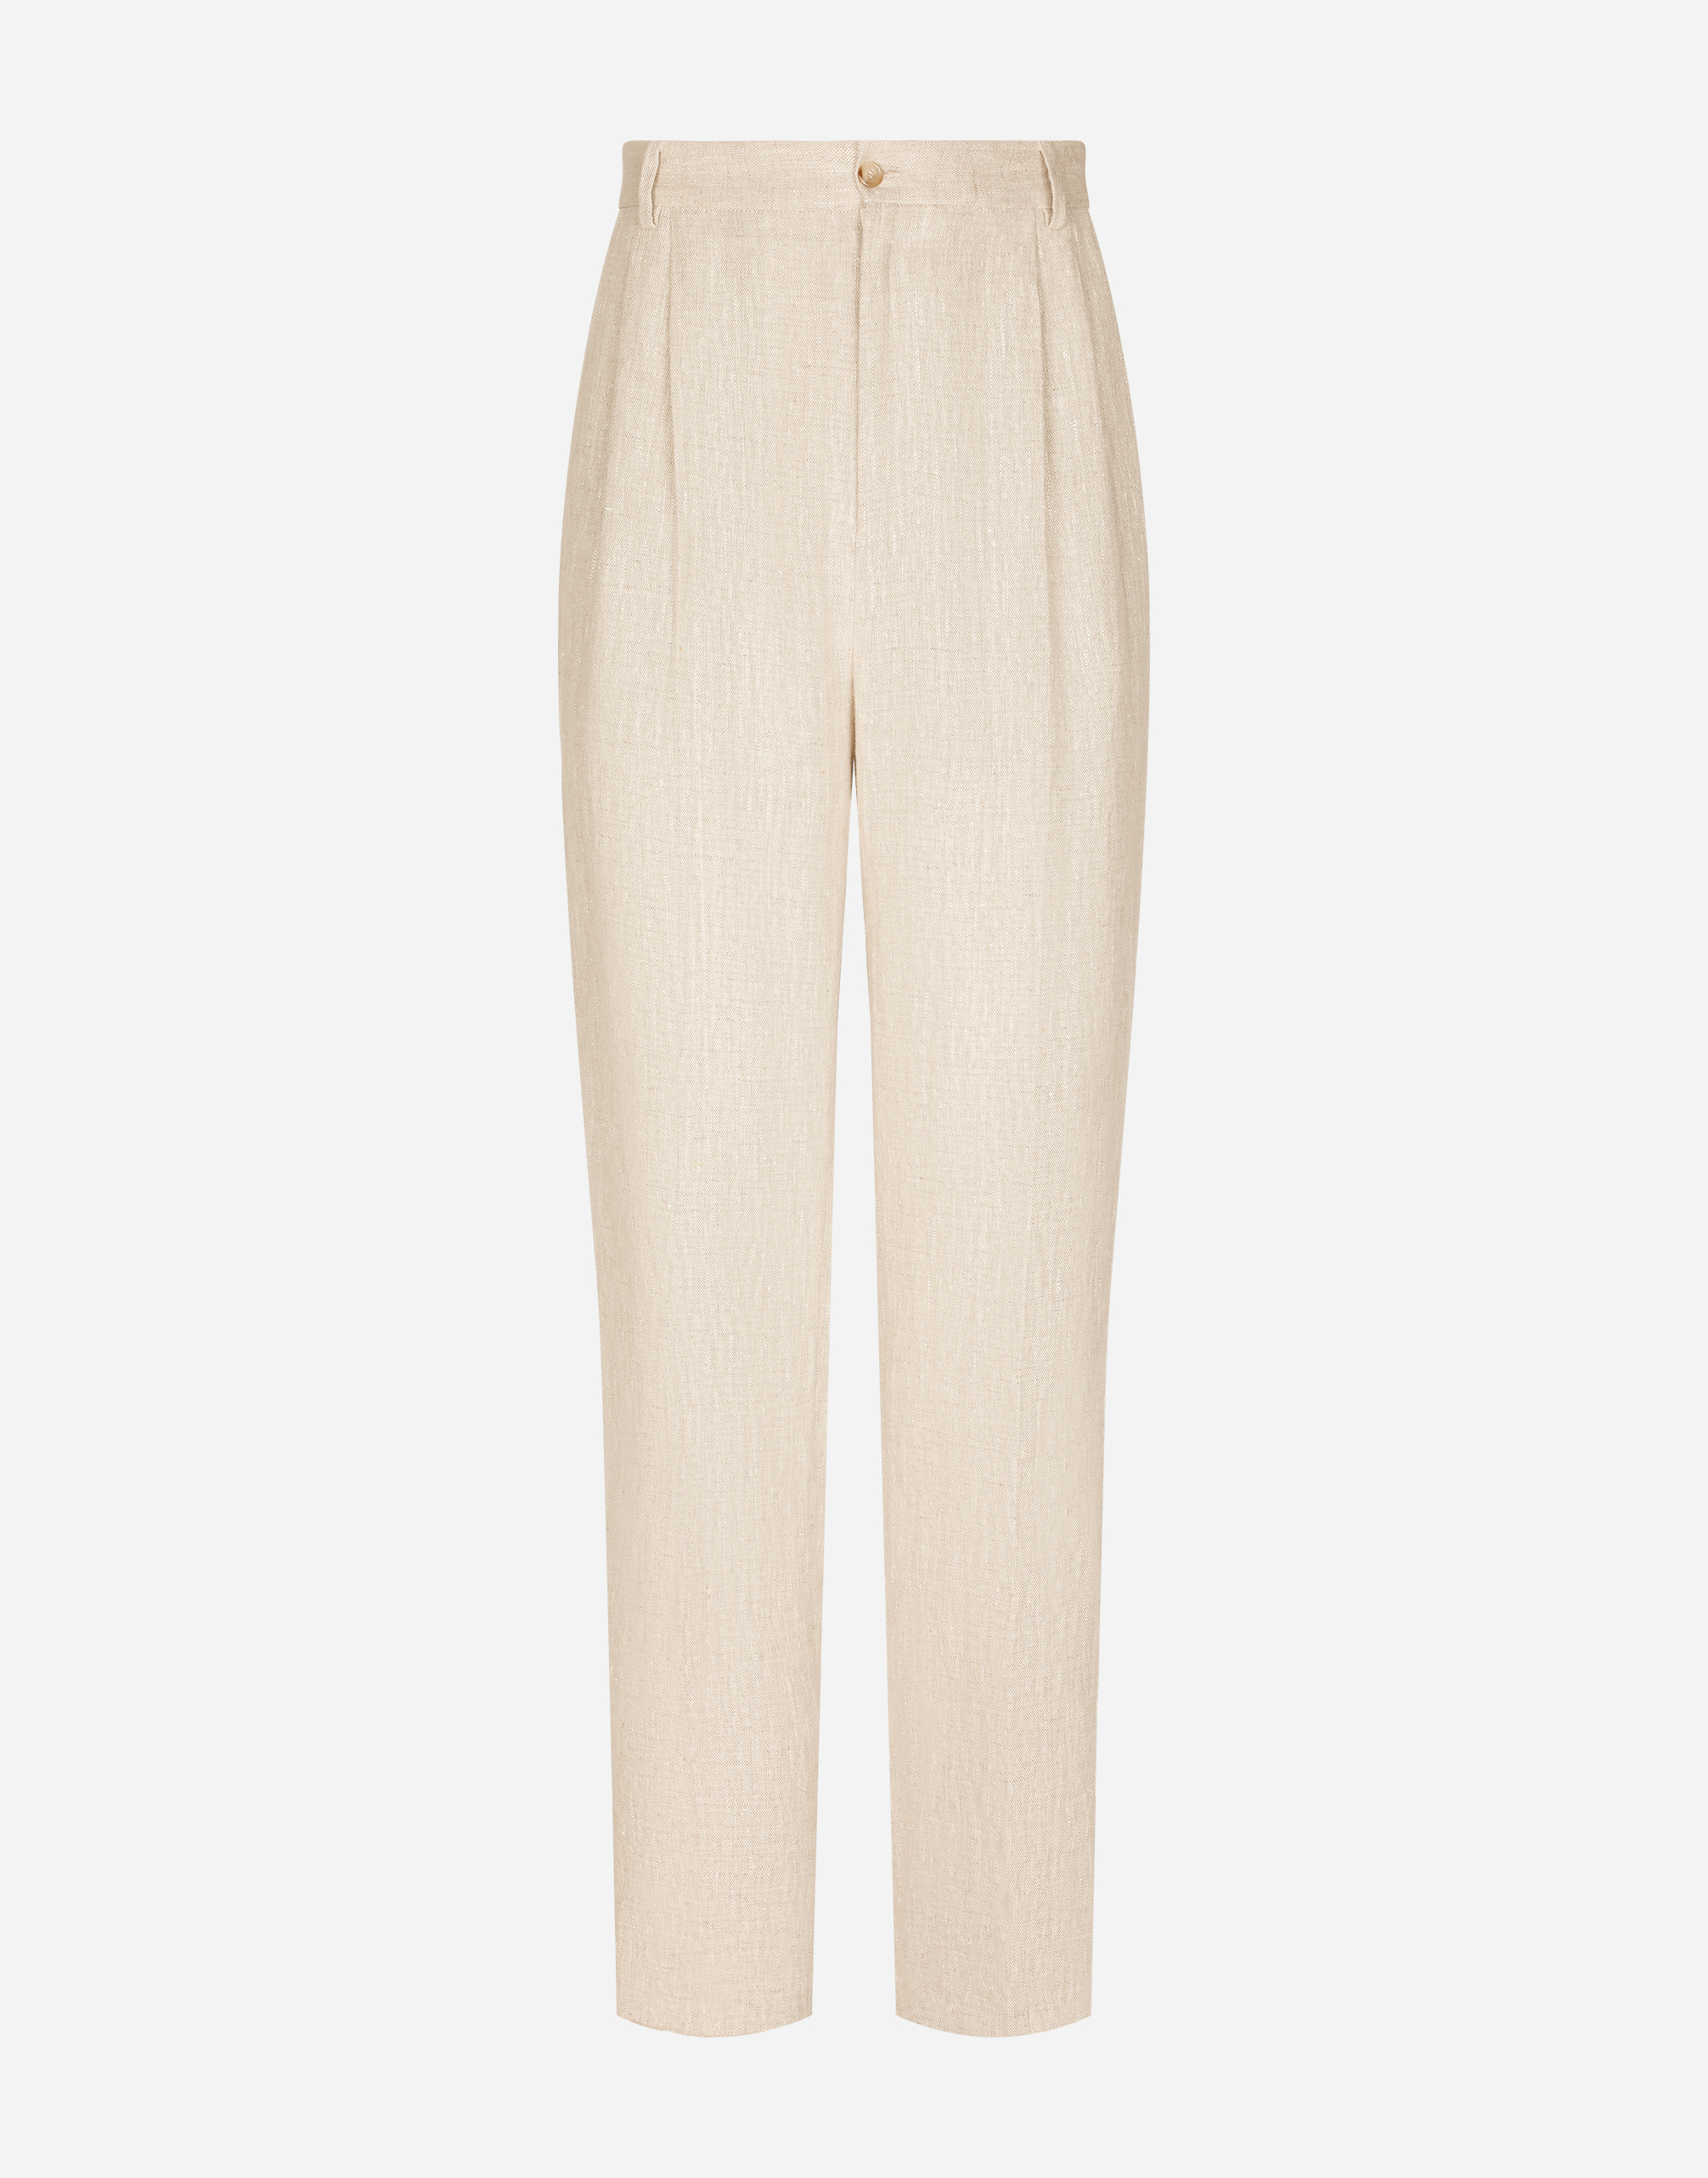 Tailored linen pants in Multicolor